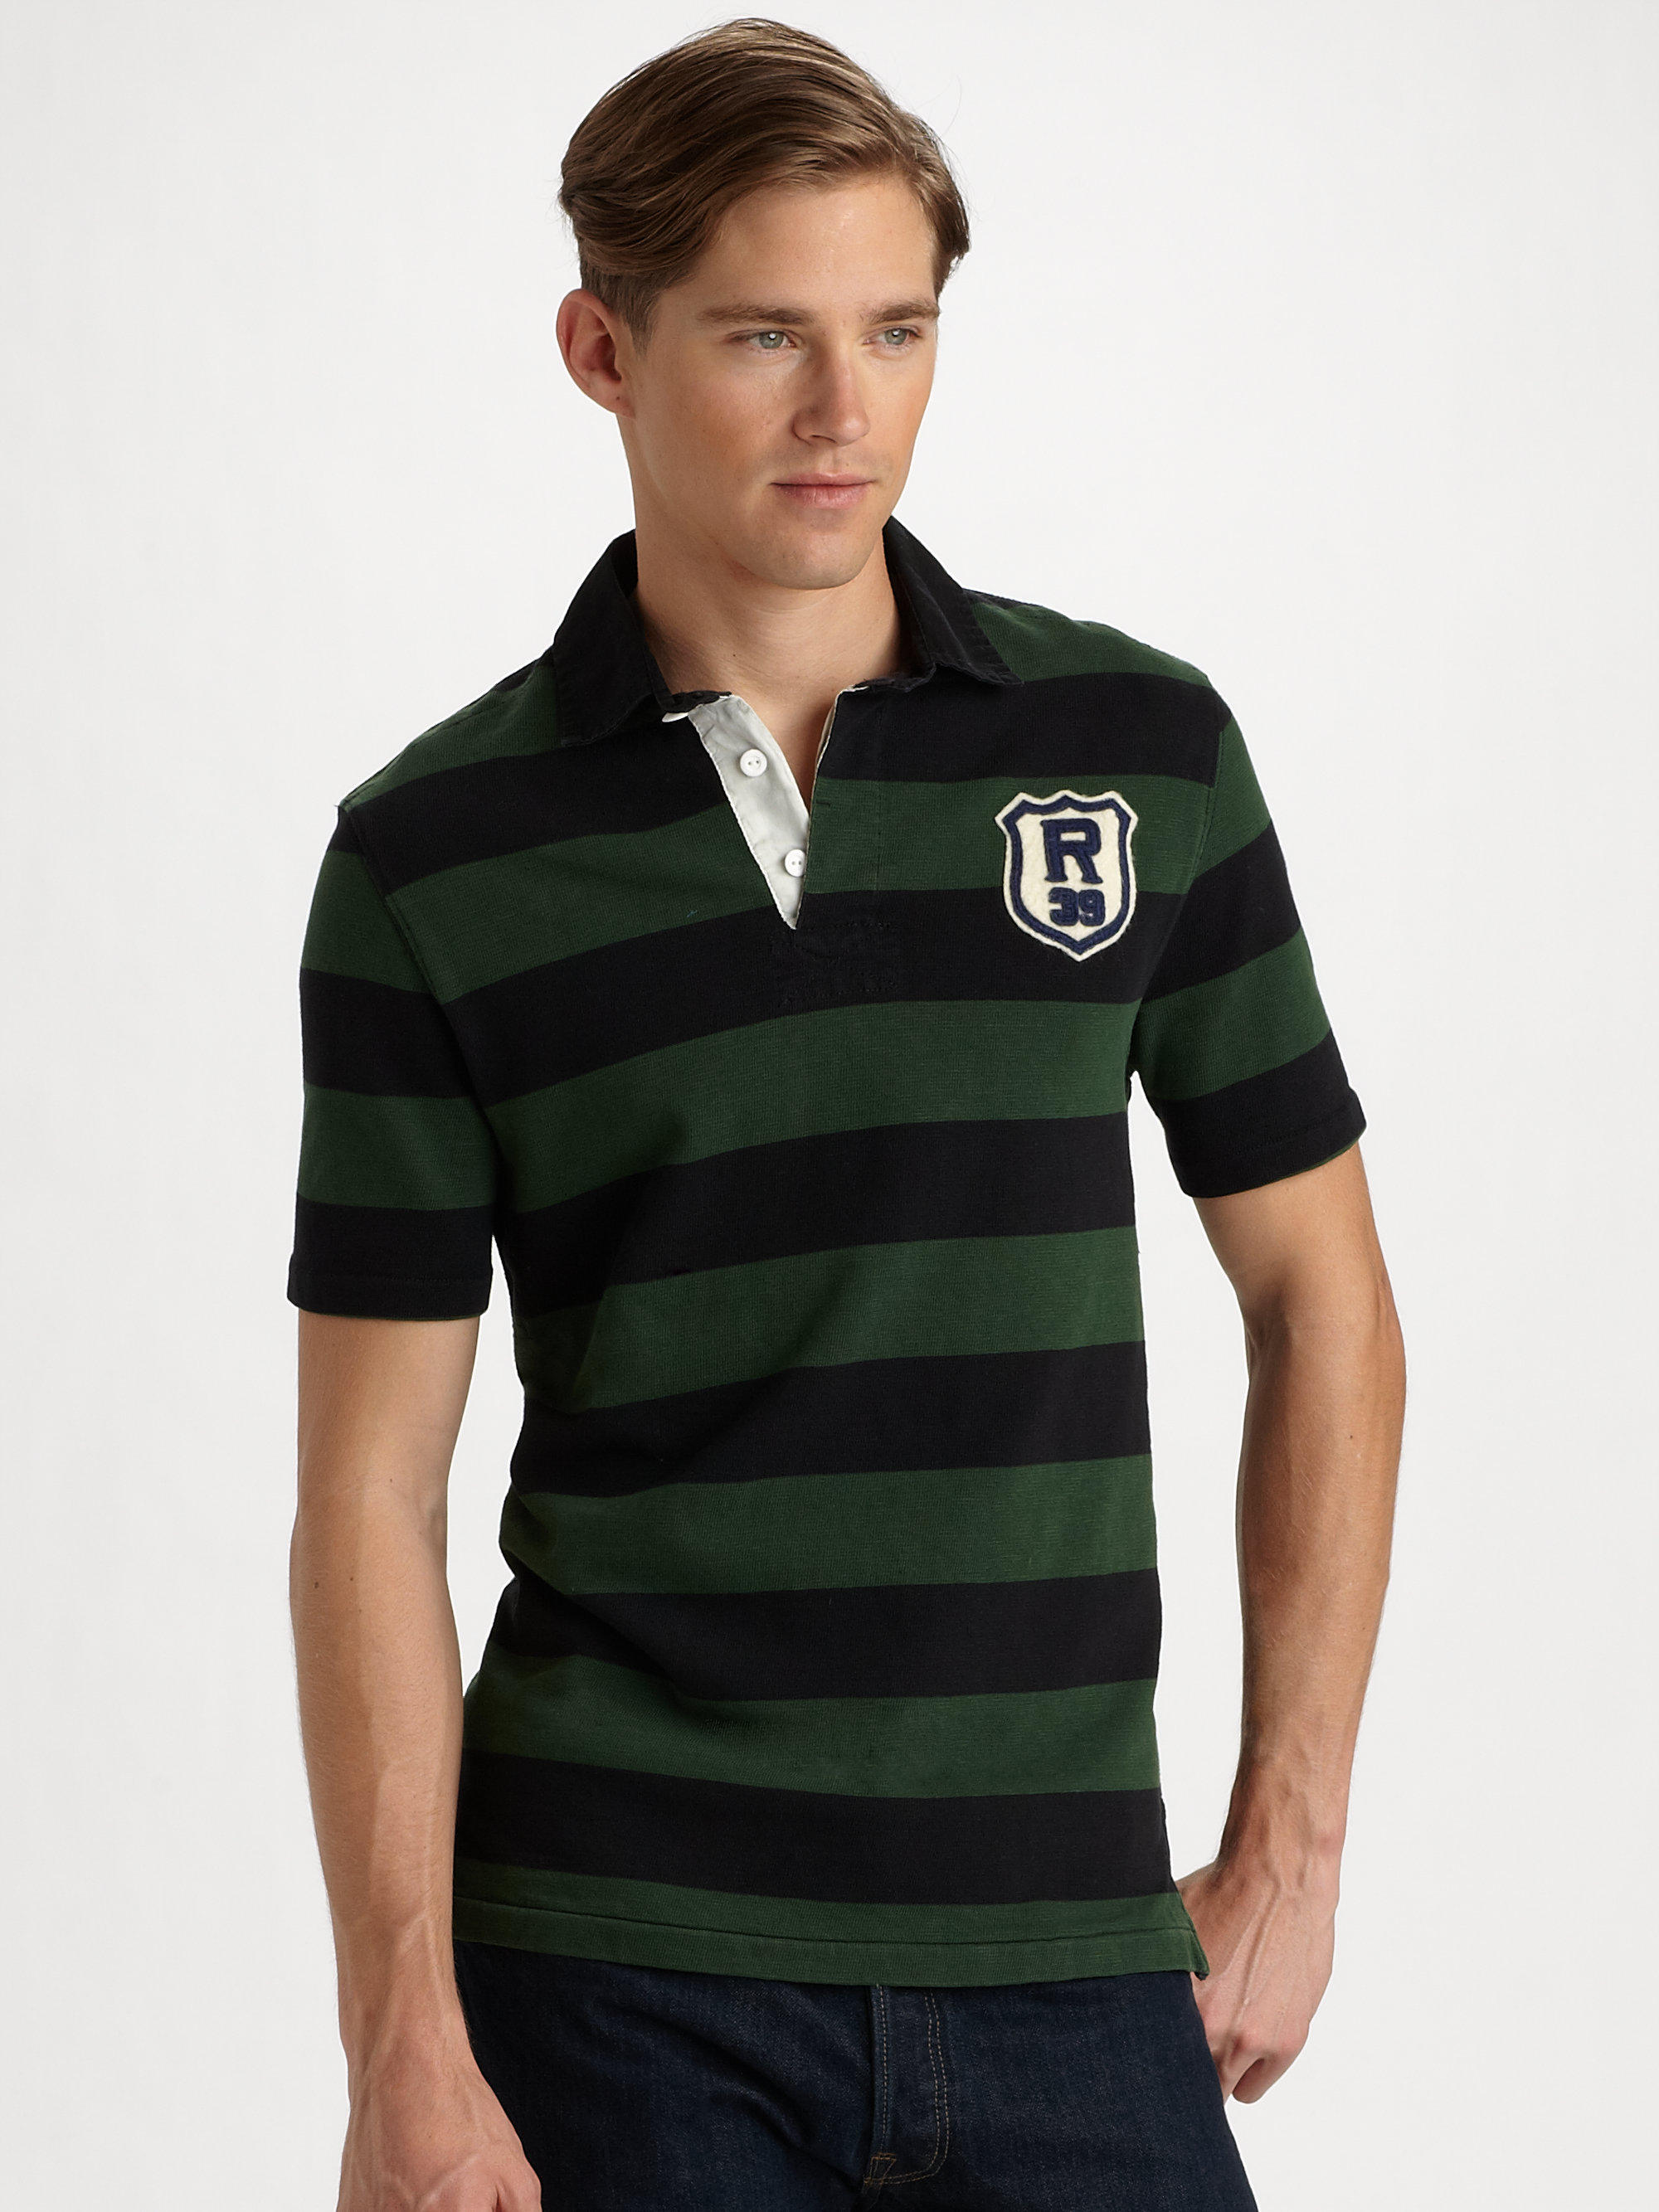 Lyst - Polo ralph lauren Customfit Striped Rugby Shirt in Green for Men